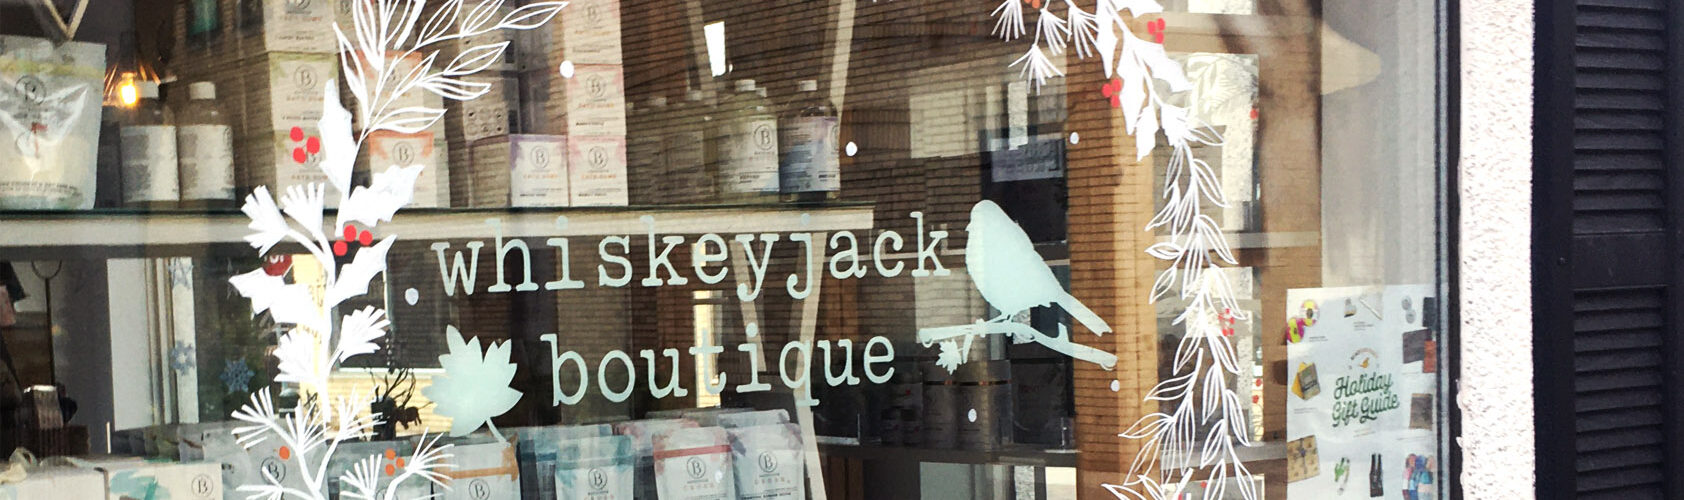 Painted storefront window at Whiskey Jack Boutique